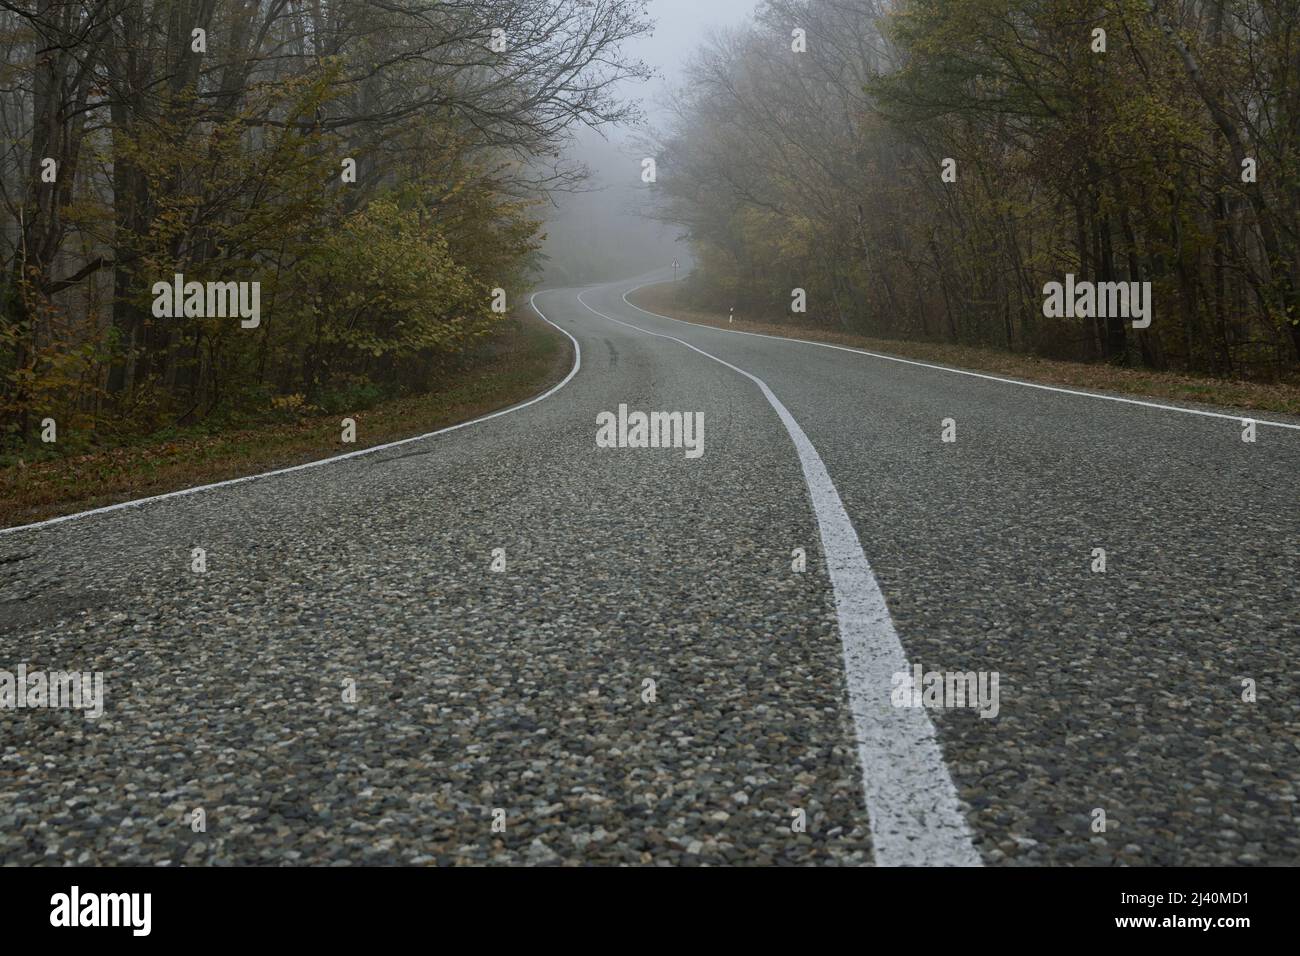 A country road curve with white lines of markings in an autumn forest. Asphalt road and forest in the fog. Mysterious landscape Stock Photo